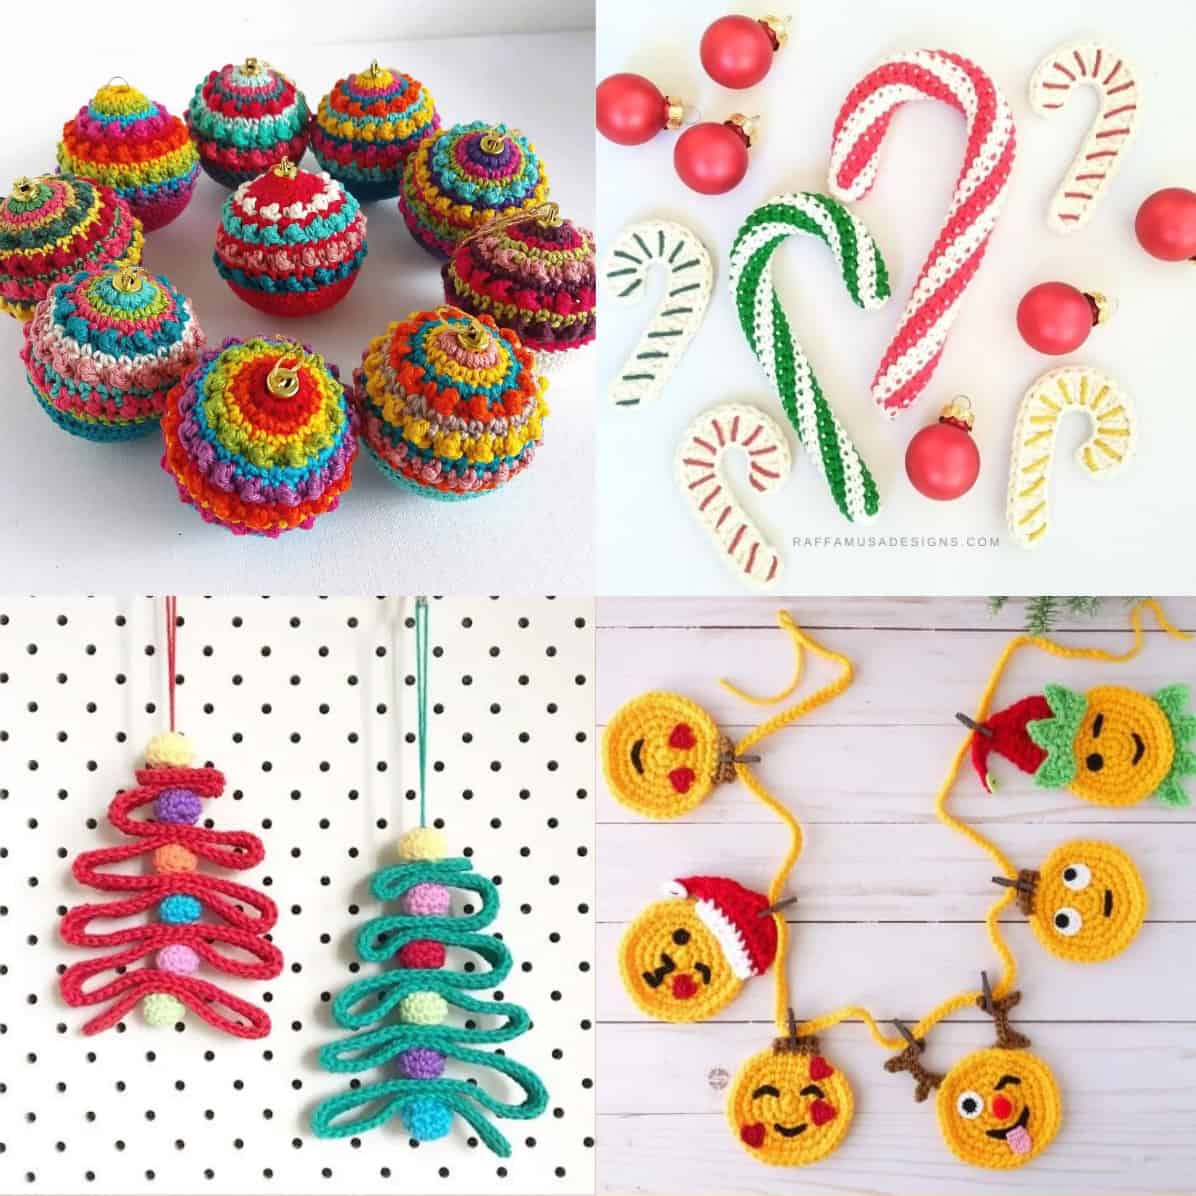 Fresh & Fabulous: 35 Wood Bead Crafts with a Twist - DIY Candy